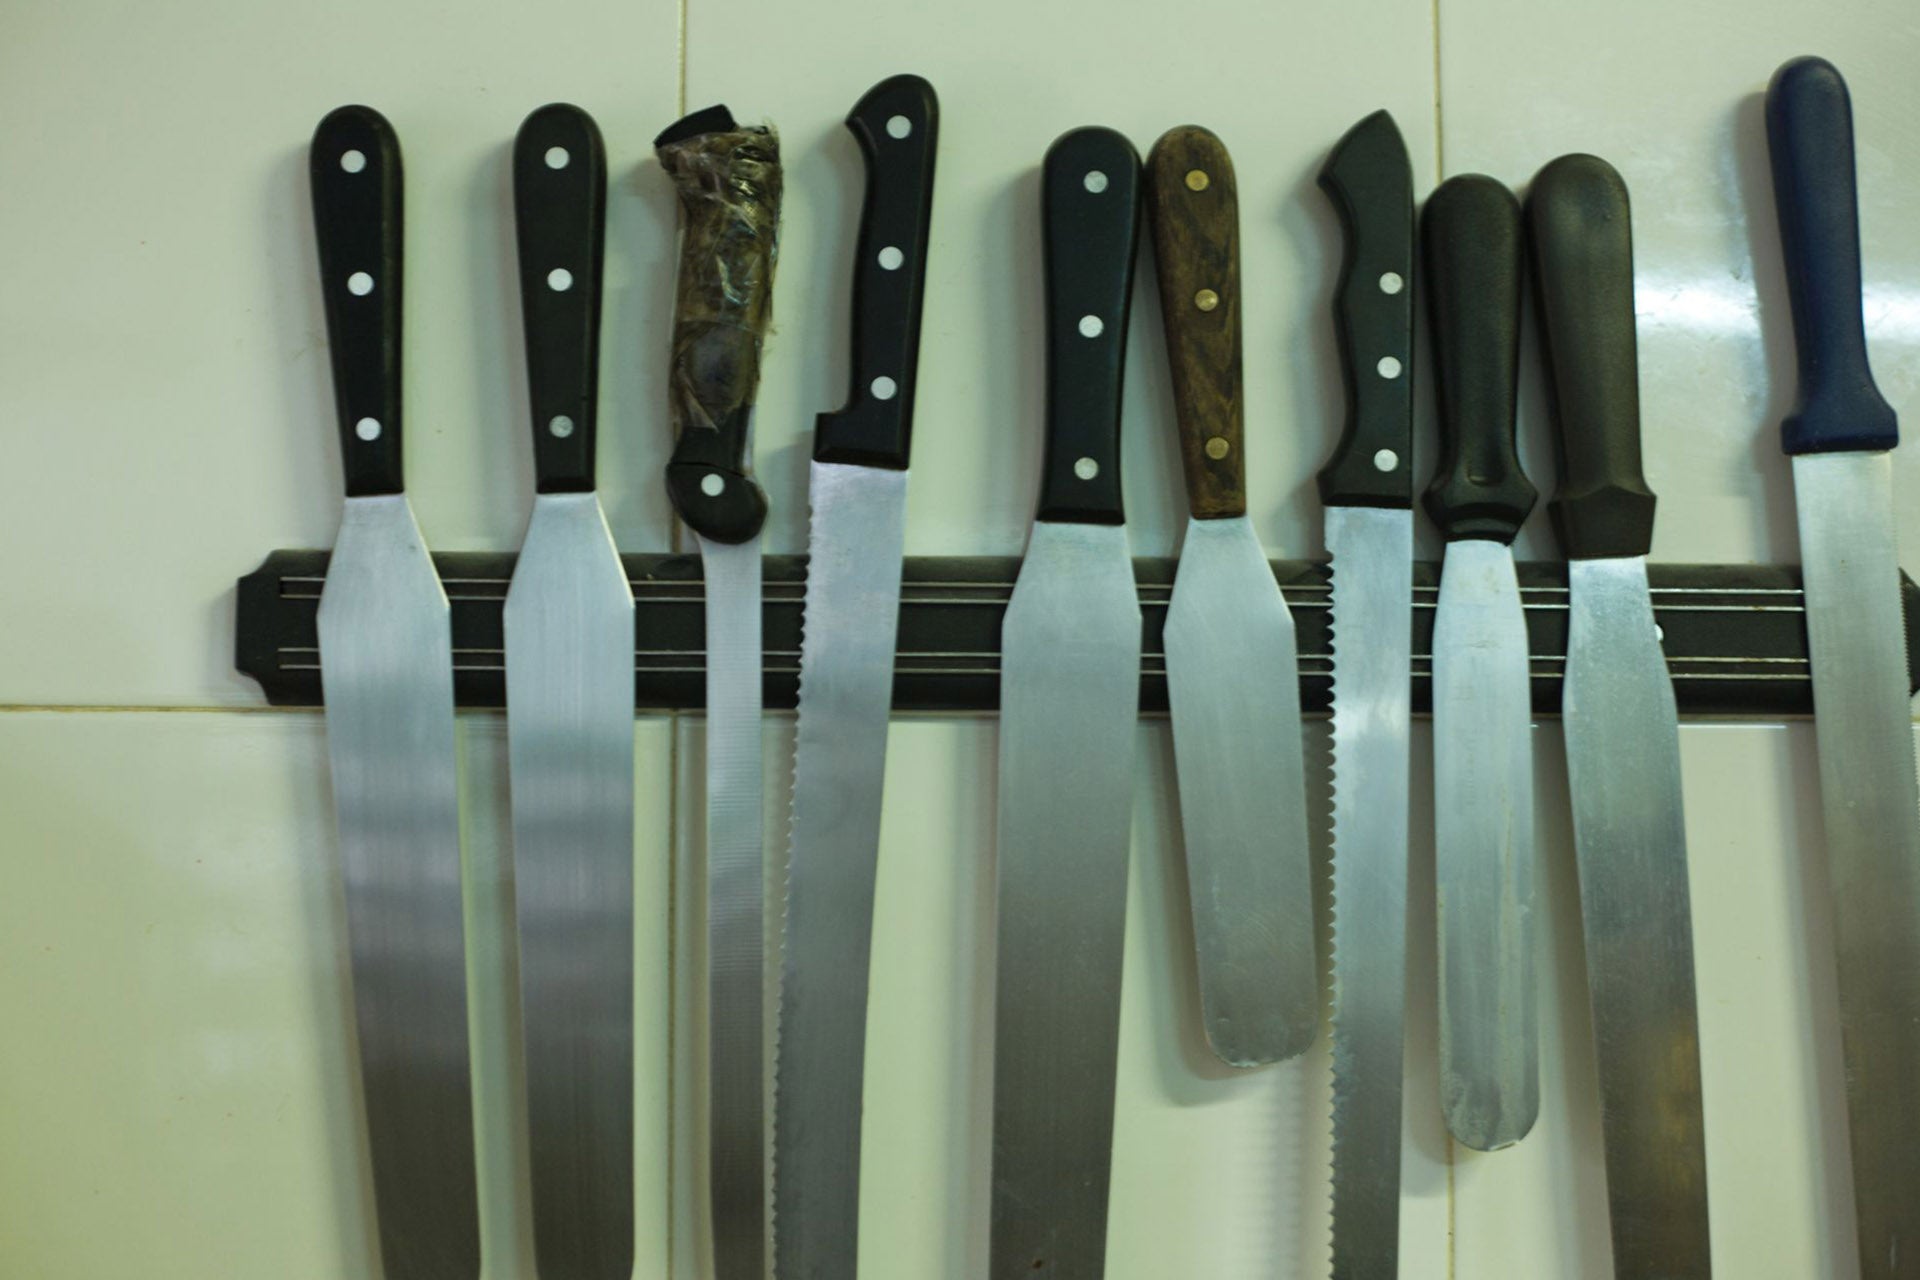 A set of knives stored on a magnetic knife rack